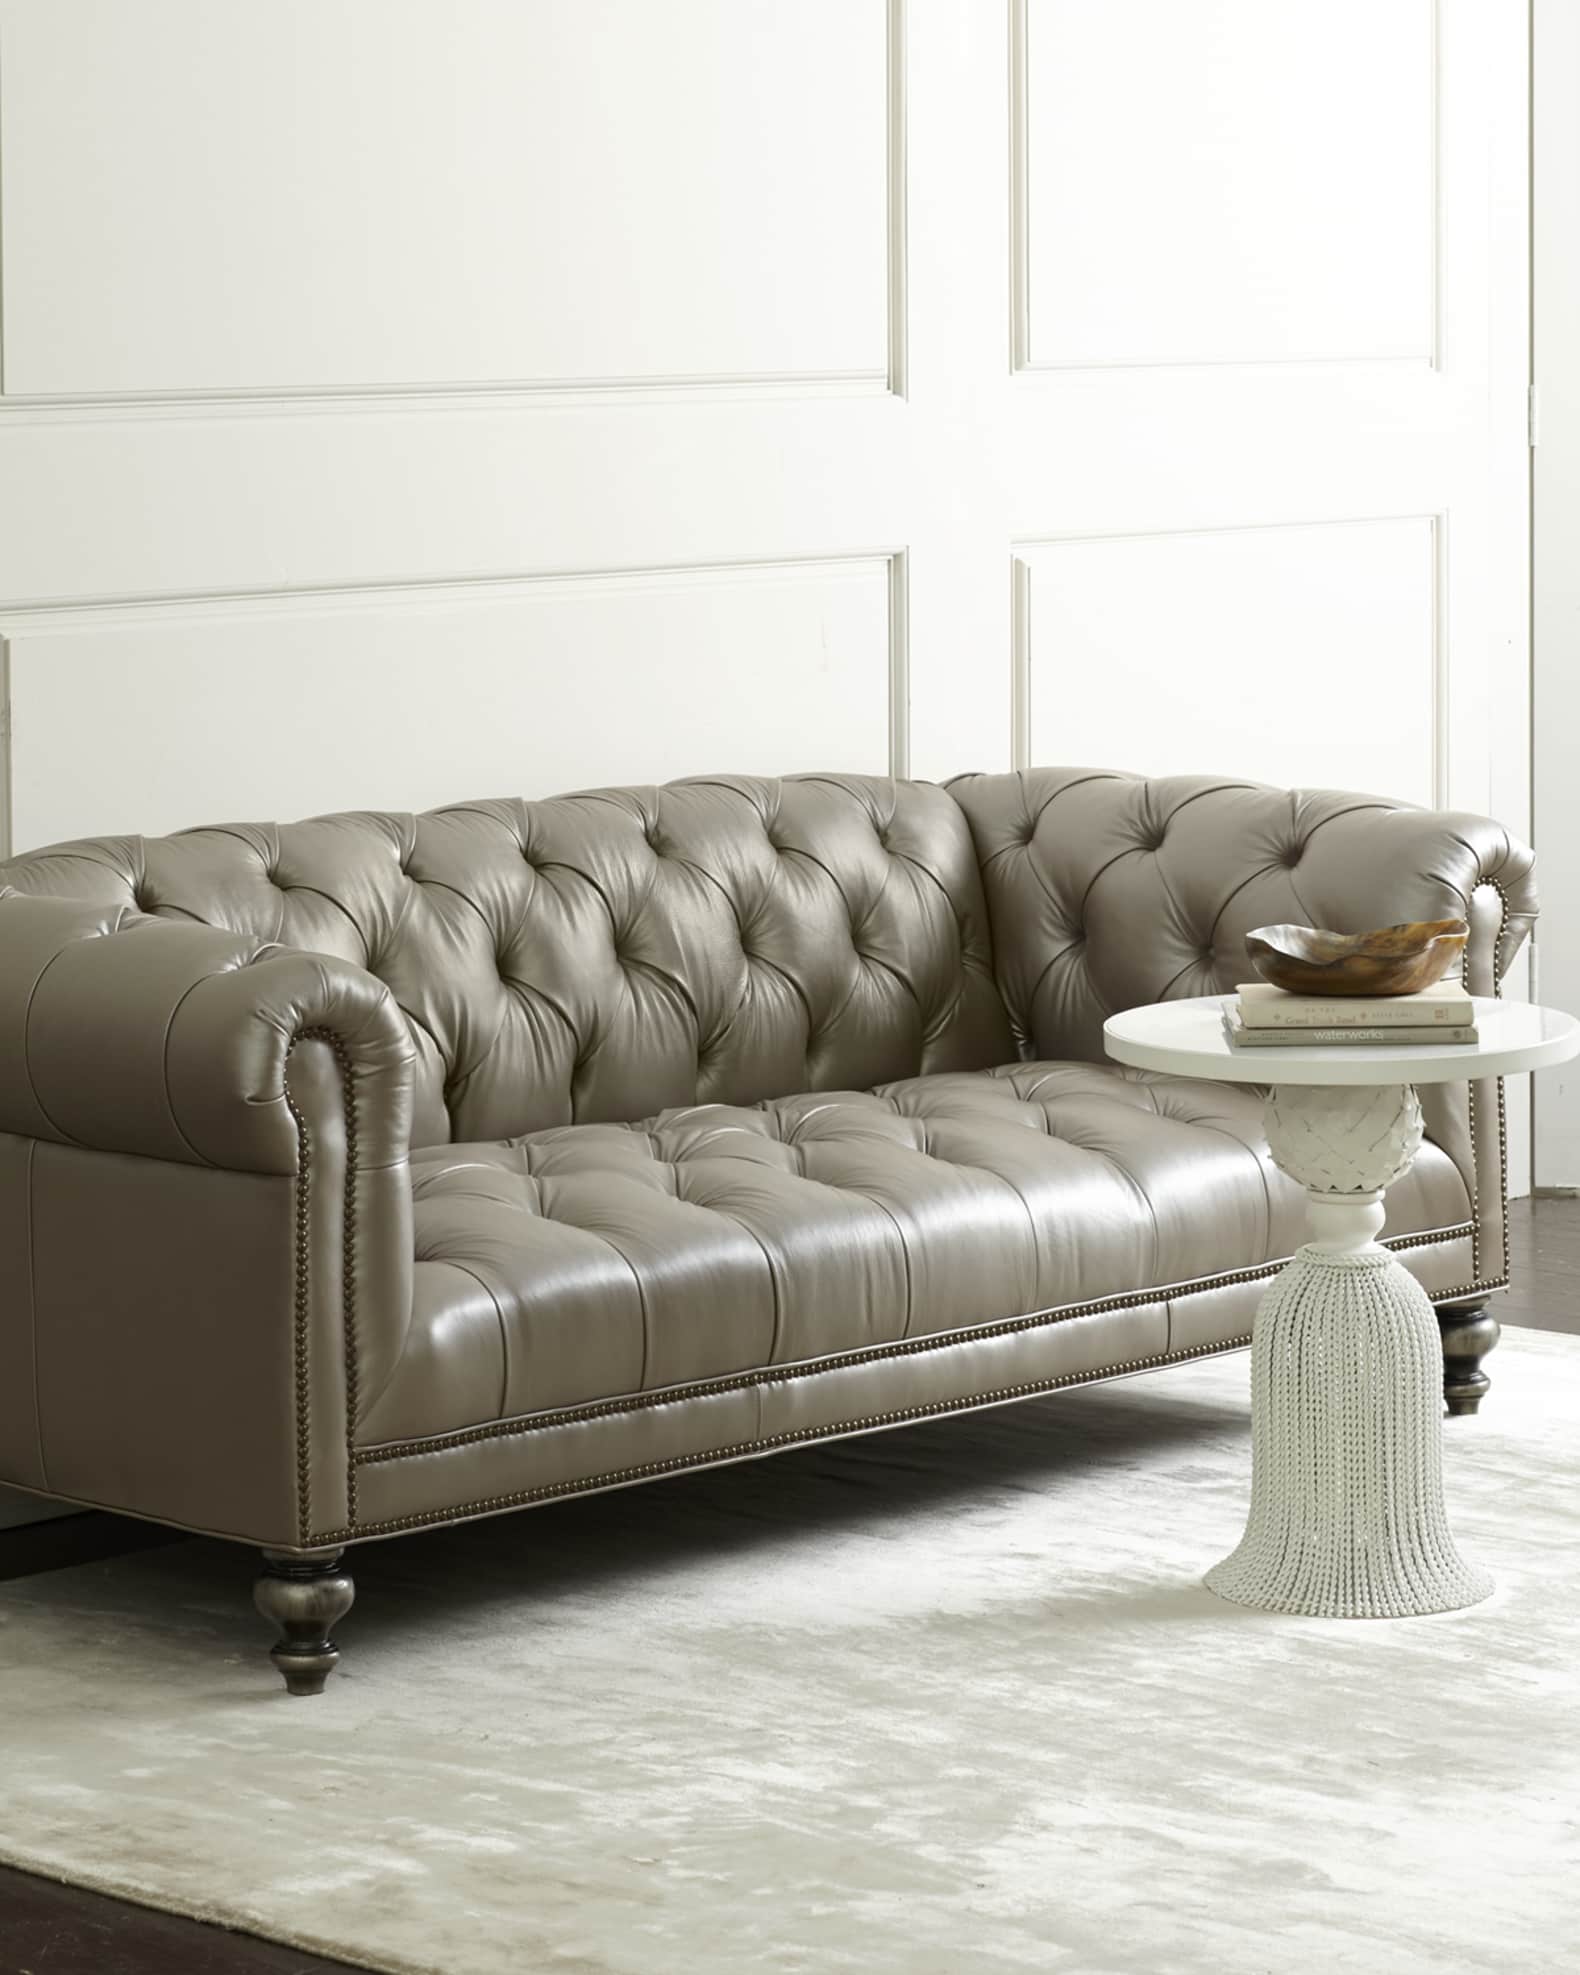 Old Hickory Tannery Morgan Gray Chesterfield Leather Sofa